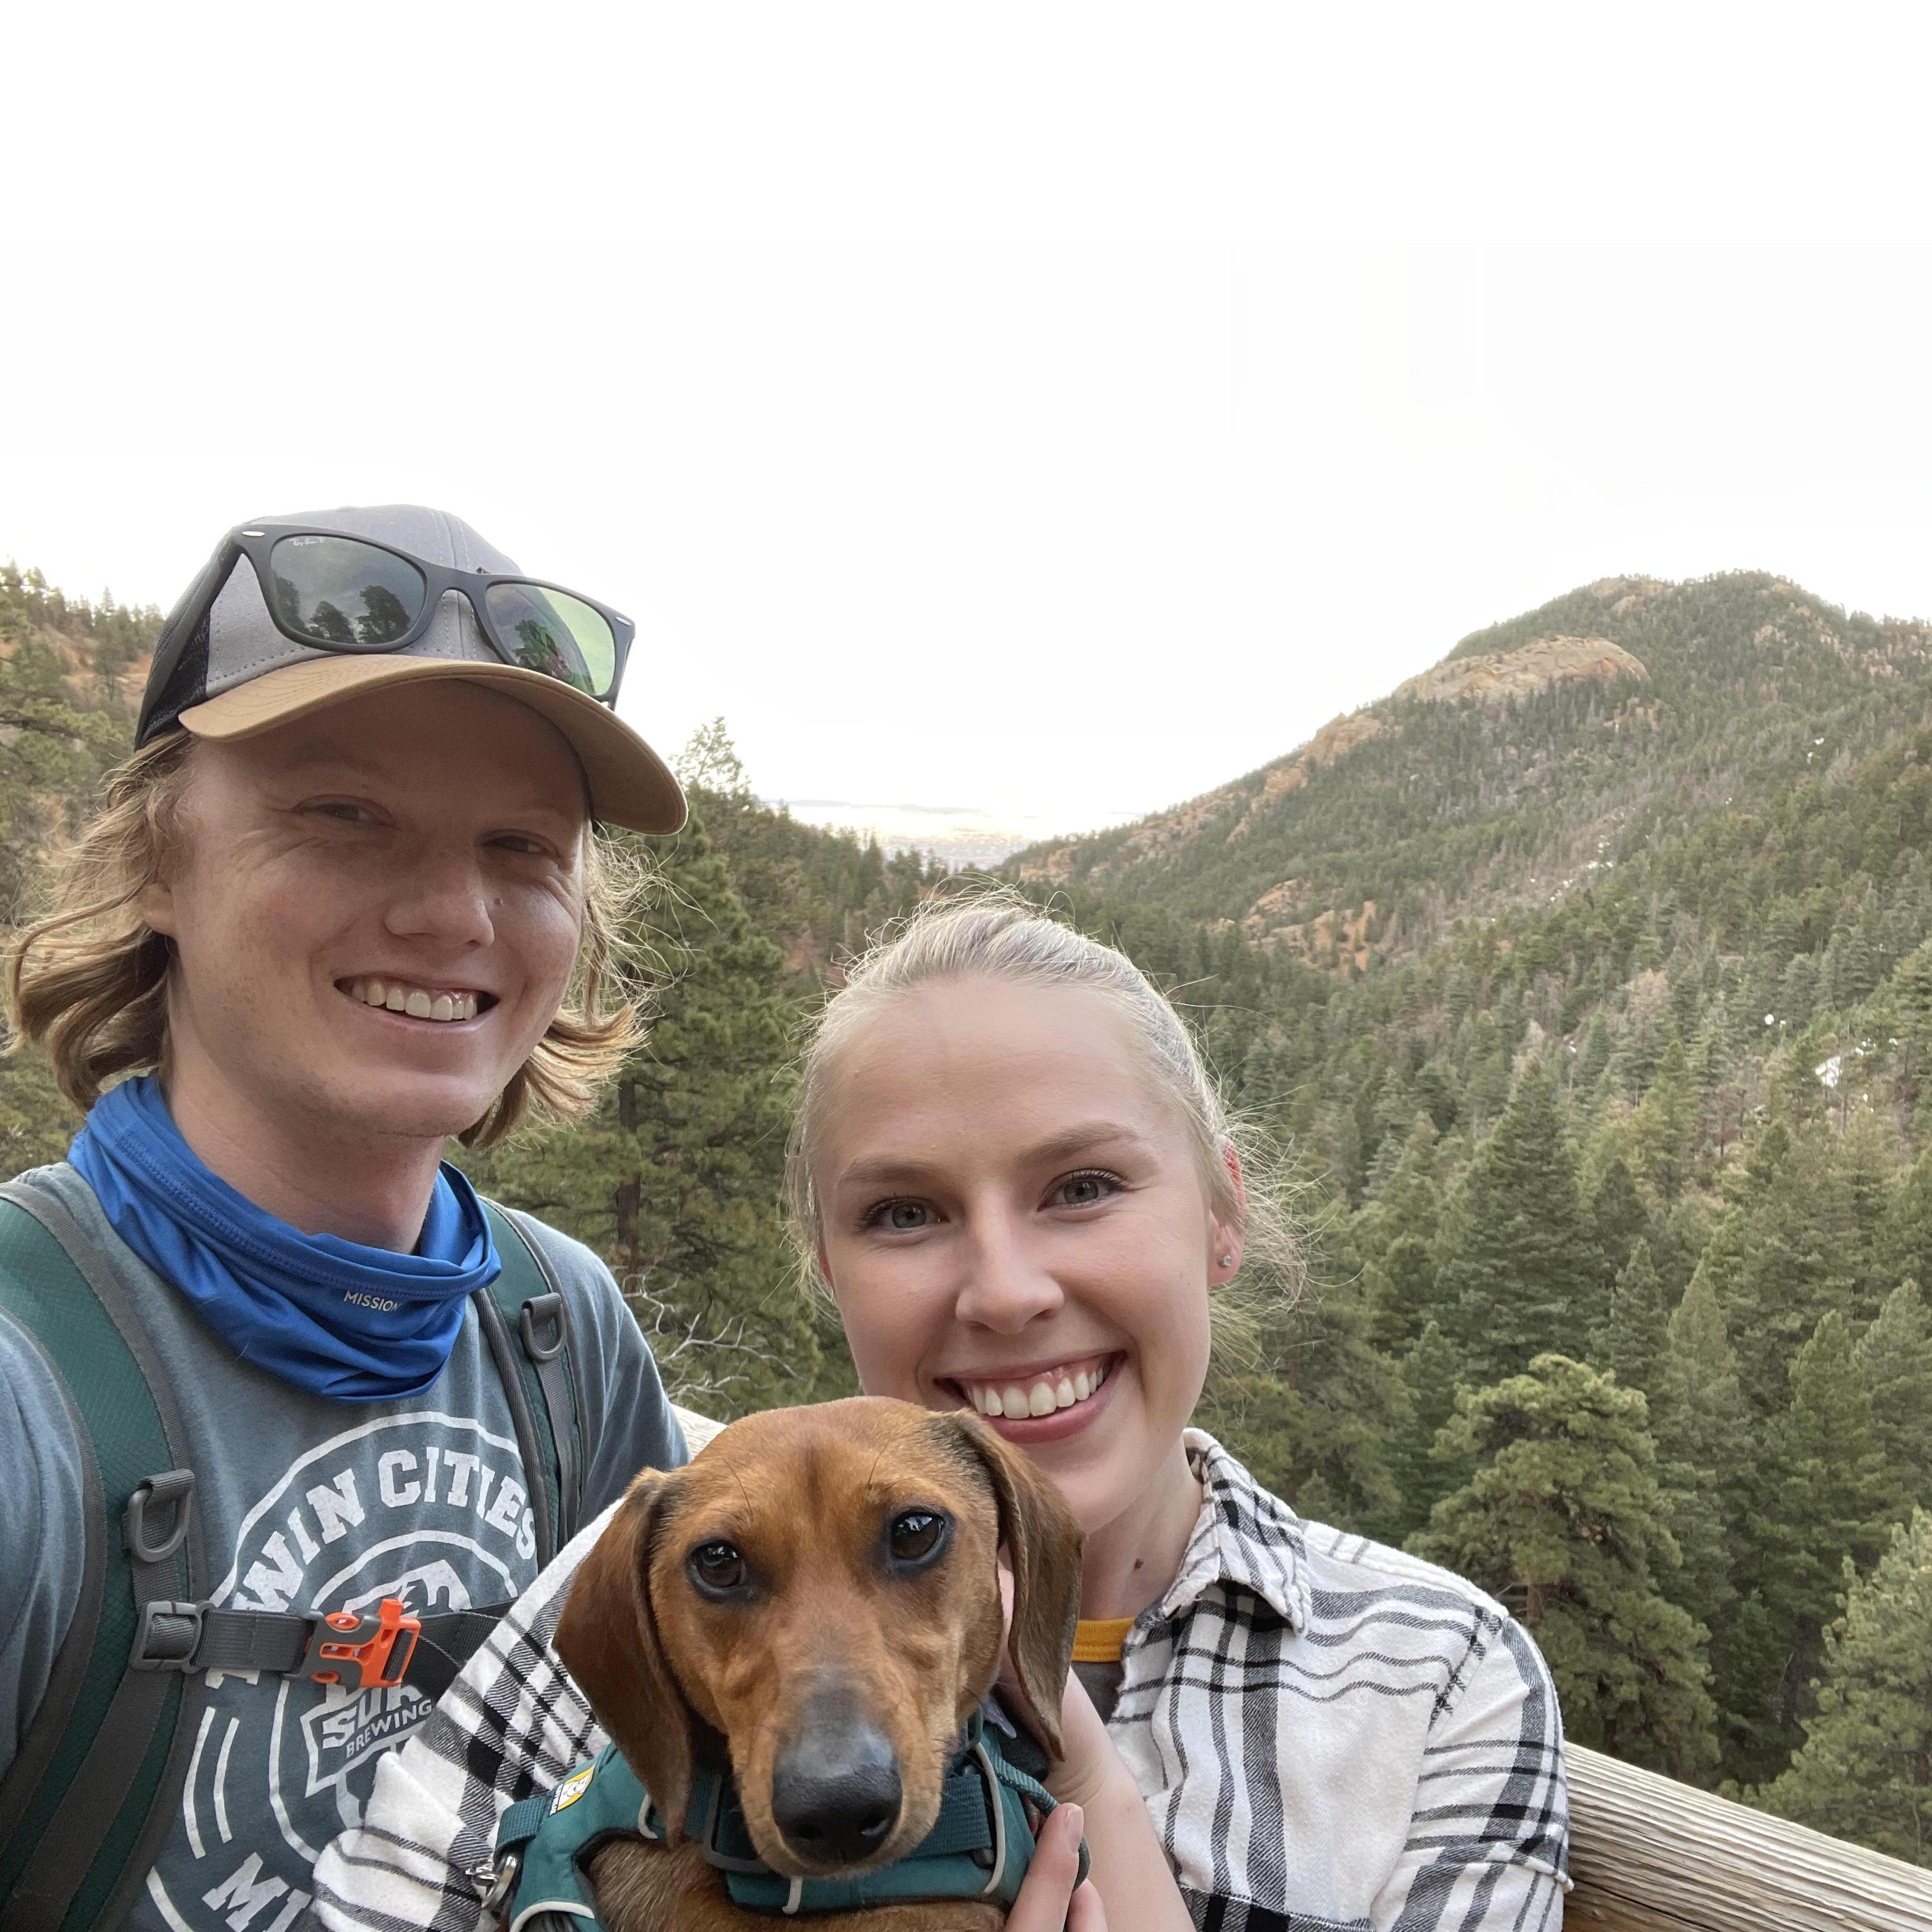 Hiking outside of Colorado Springs during our 2 month long trip last spring. We stayed in Colorado for 1 month before moving on to Utah for the next month.